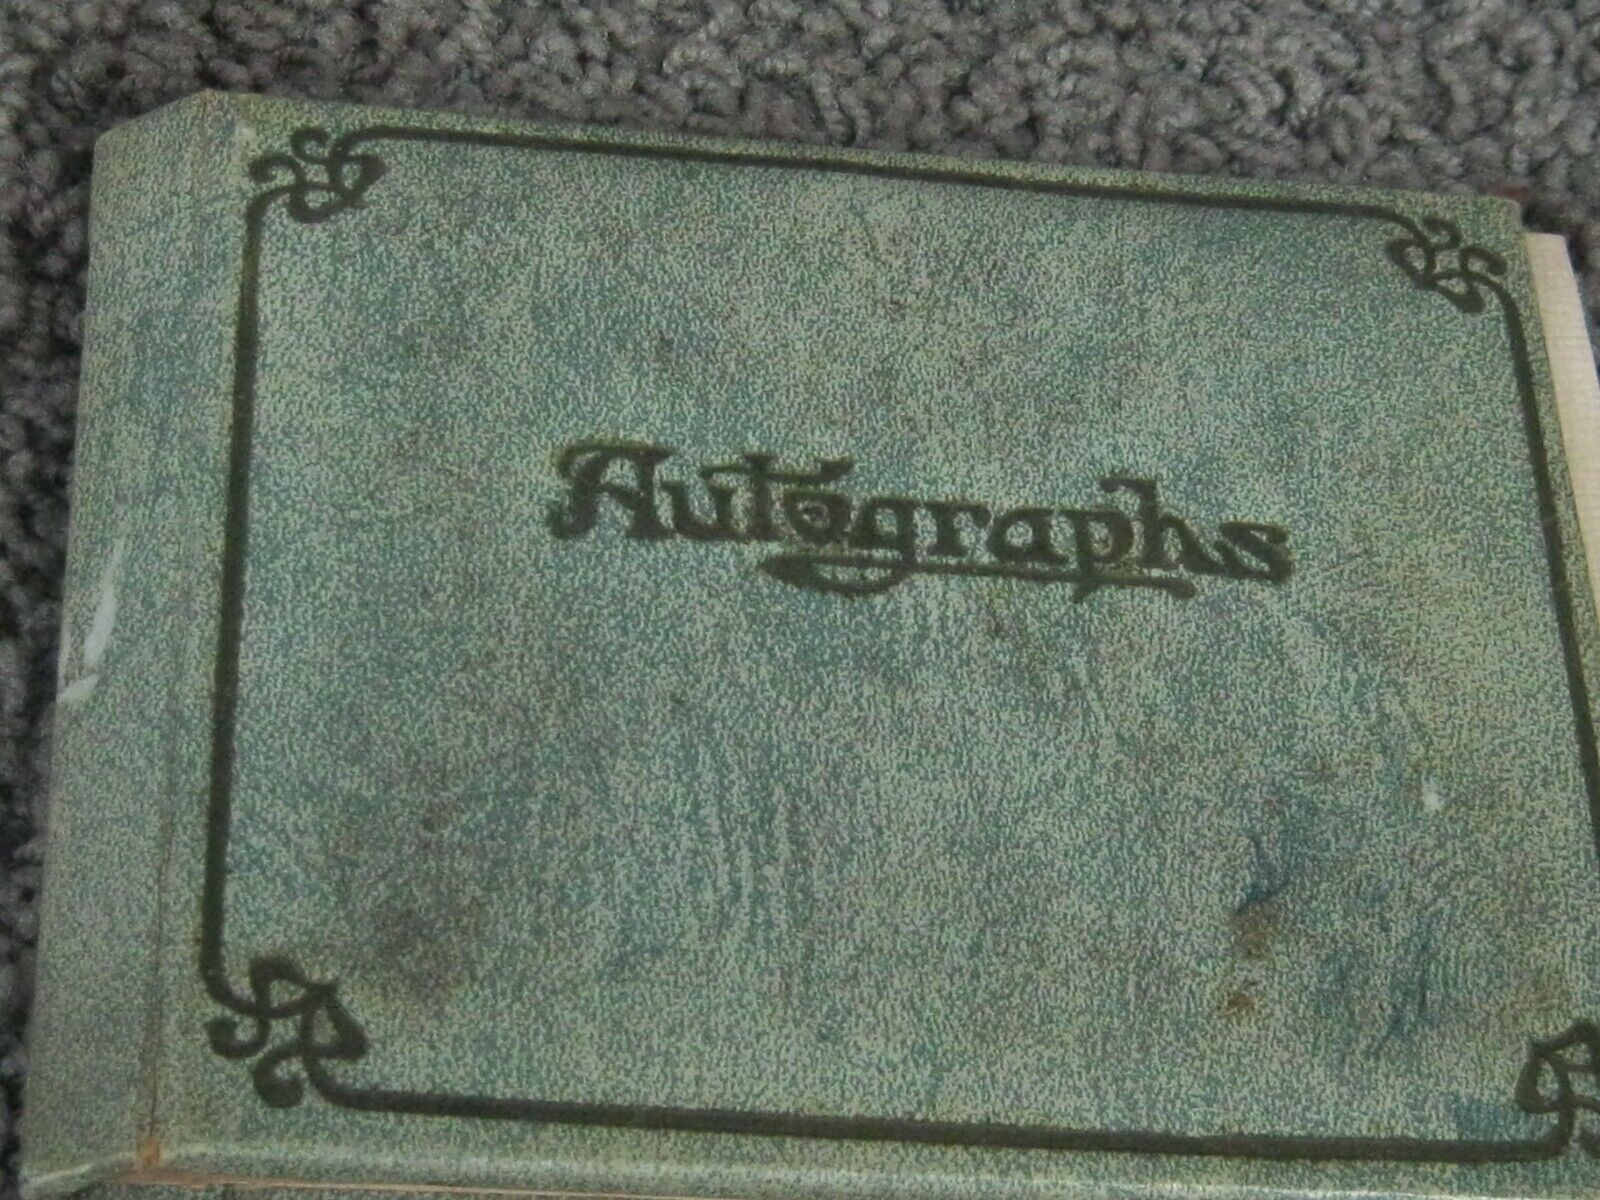 EIGHT different school autograph/memory books: 1910-1950